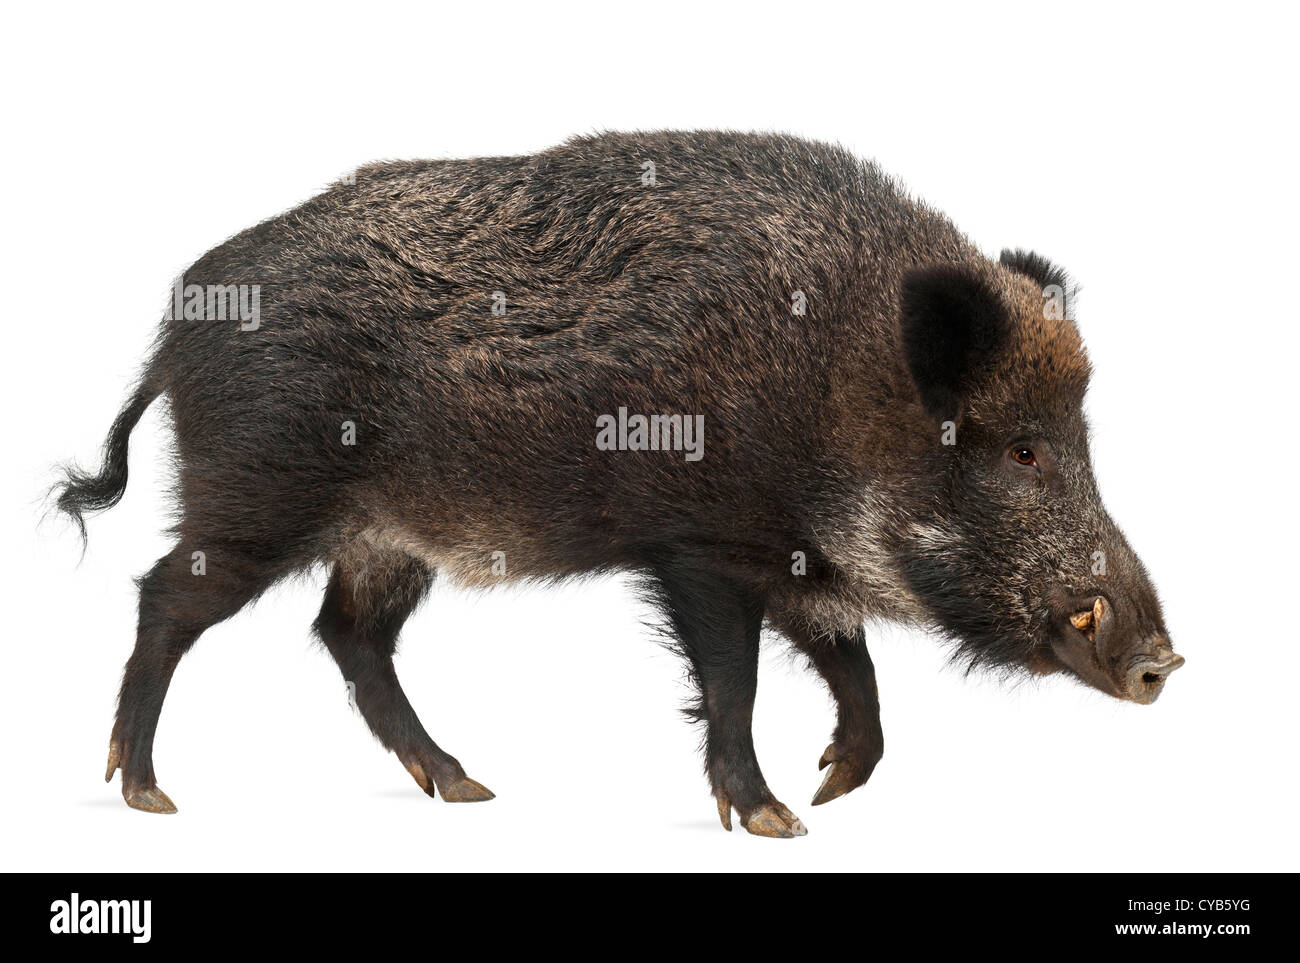 Wild boar, also wild pig, Sus scrofa, 15 years old, against white background Stock Photo